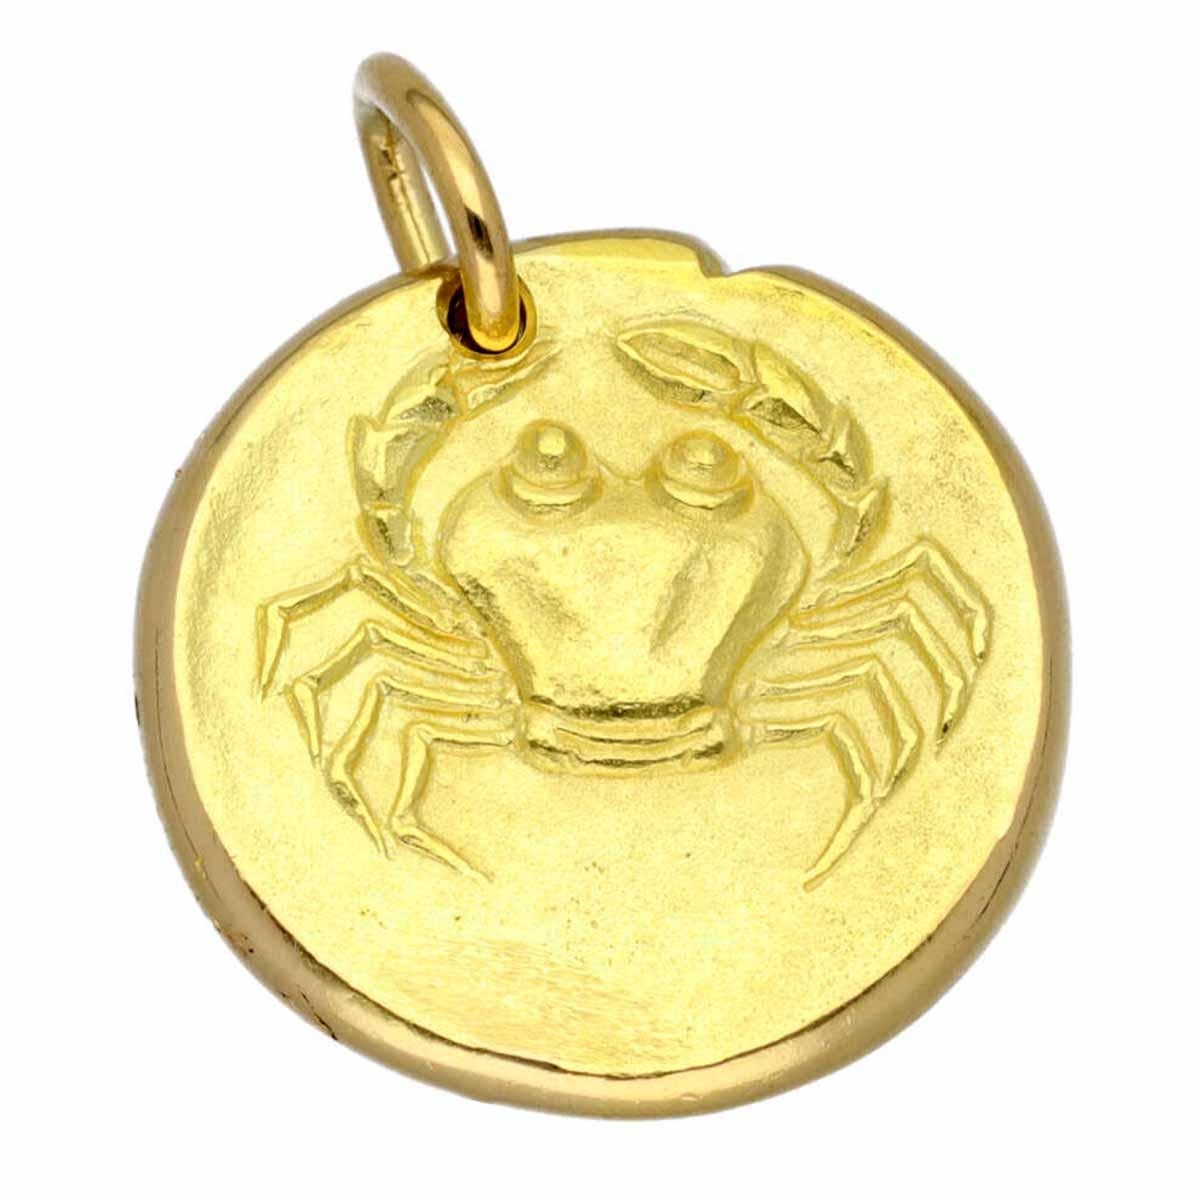 ■ Brand: VanCleef & Arpels
■ Product Name: Zodiac Mini Medal - Cancer
■ Material: 750 K18 YG Yellow Gold
■ Weight: Approximately 7.0g (Approx)
■ Size: Approximately W19.04mm × H18.94mm (excluding the bail) × D2.40mm
■ Accessories: VCA Pouch, VCA